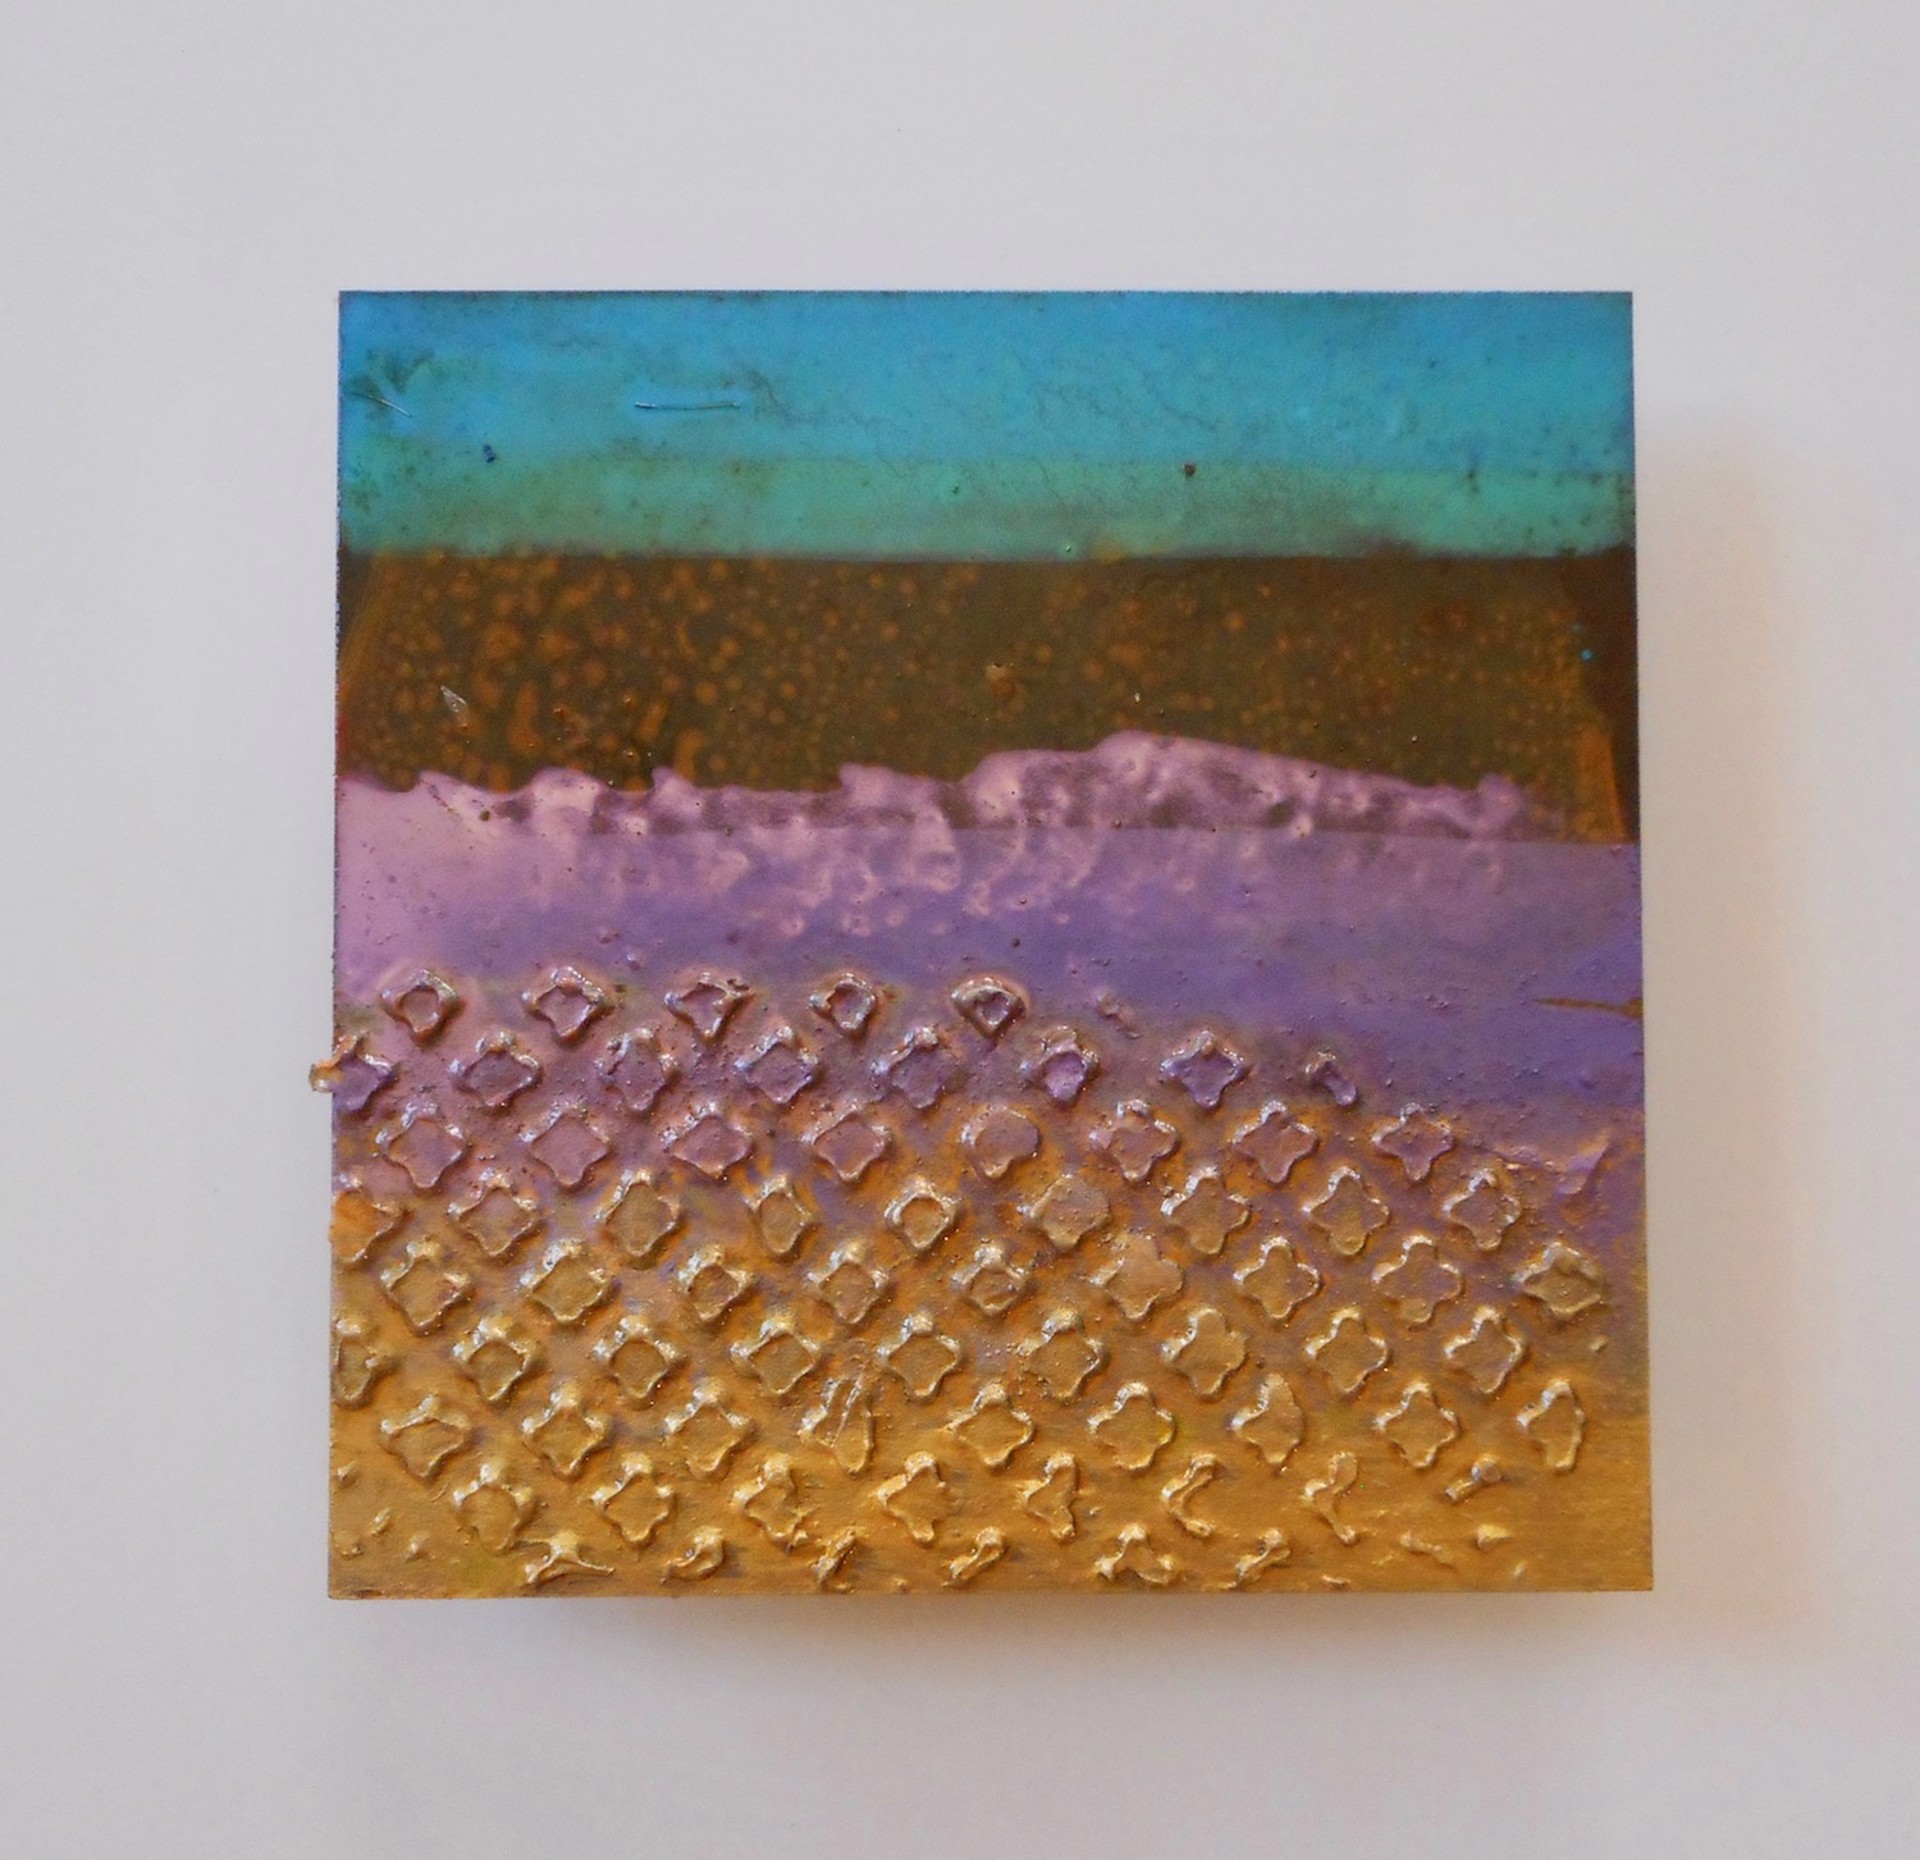 Small Metal Tile #63 by Mike Elsass